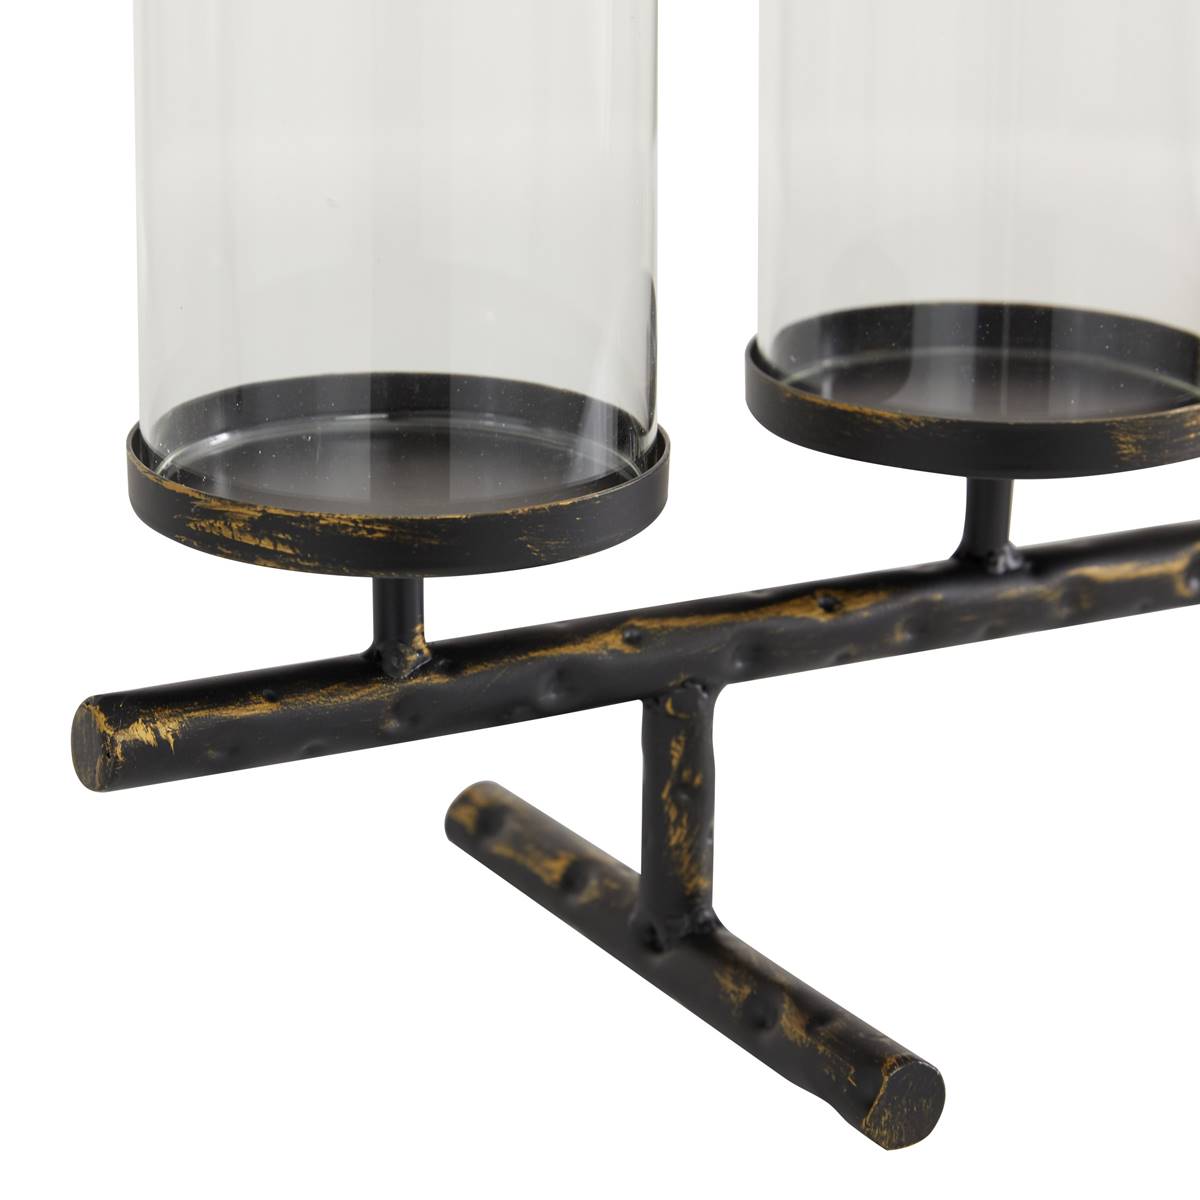 9th & Pike(R) Metal And Glass Contemporary Candlestick Holders